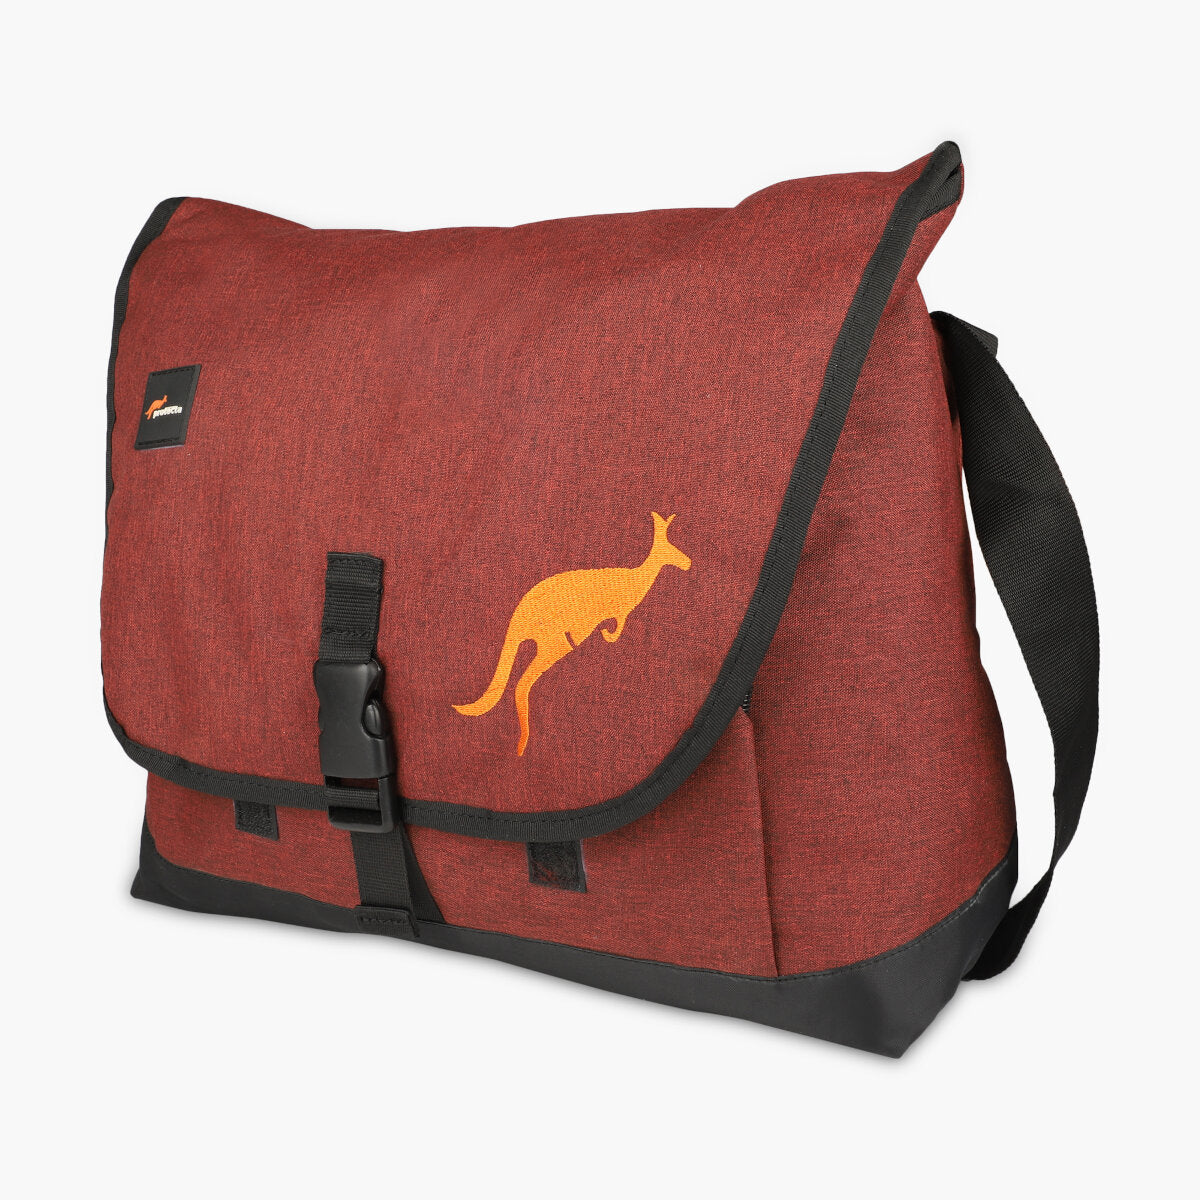 Rust Red, Protecta Leap Laptop Office Messenger Bag-2